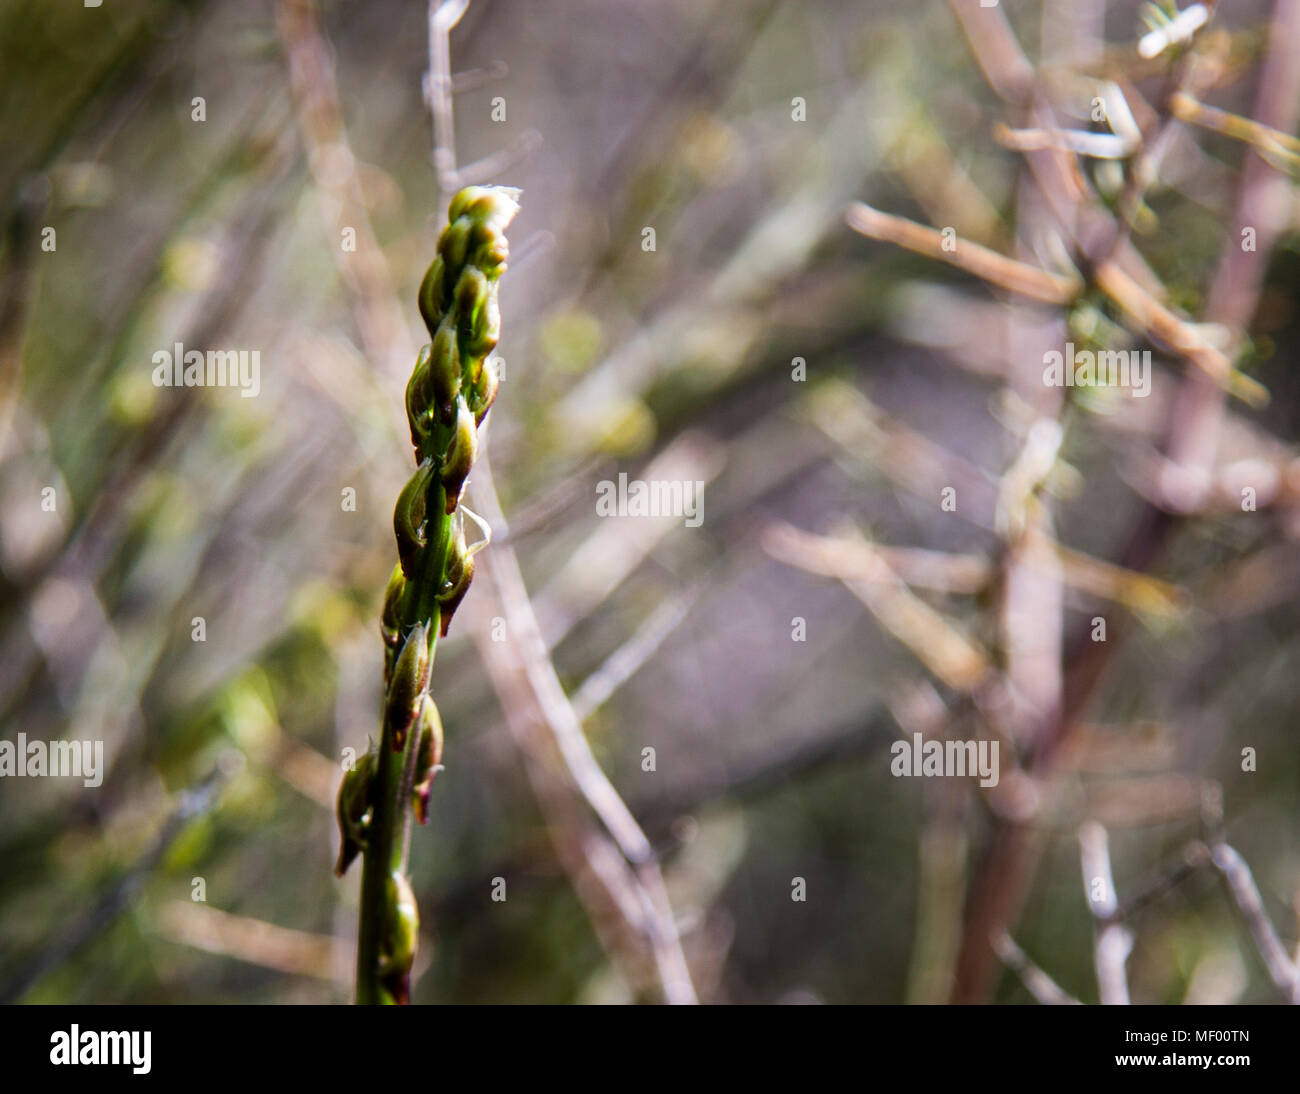 Young asparagus shoots amidst the woody asparagus herb, of the indicator plant. Foraging the wild asparagus means collecting a delicacy in Tuscany, Italy. It is precious and rare like truffles Stock Photo